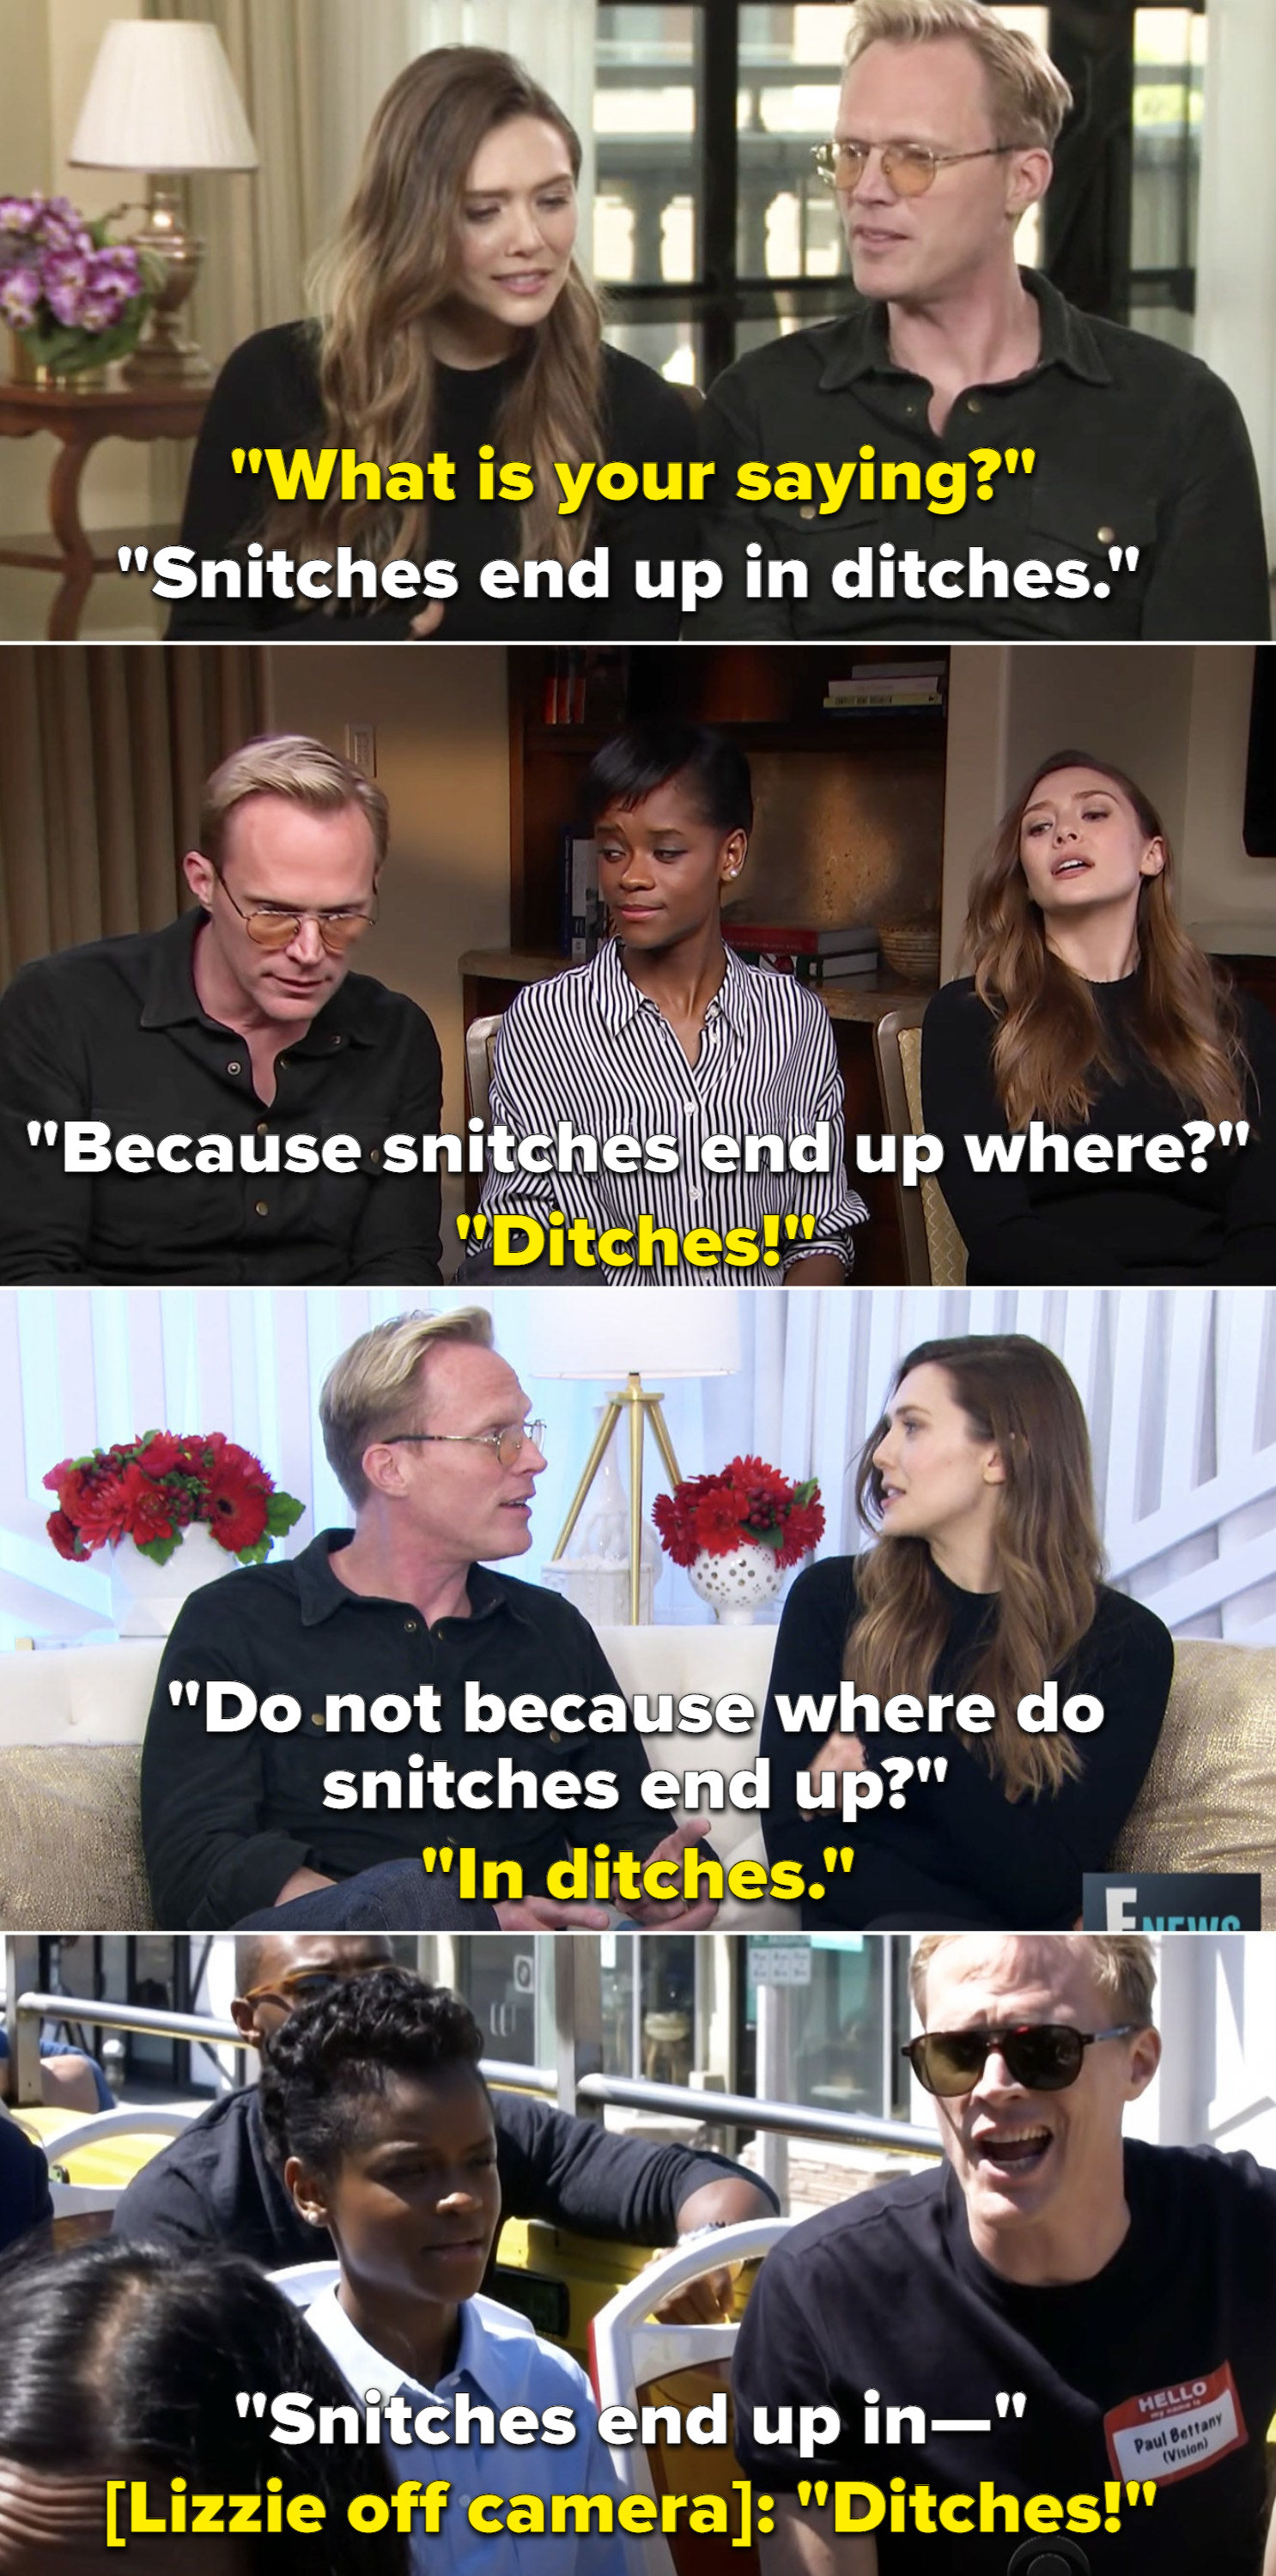 Paul and Lizzie repeating &quot;Snitched end up in ditches&quot; in four different interviews